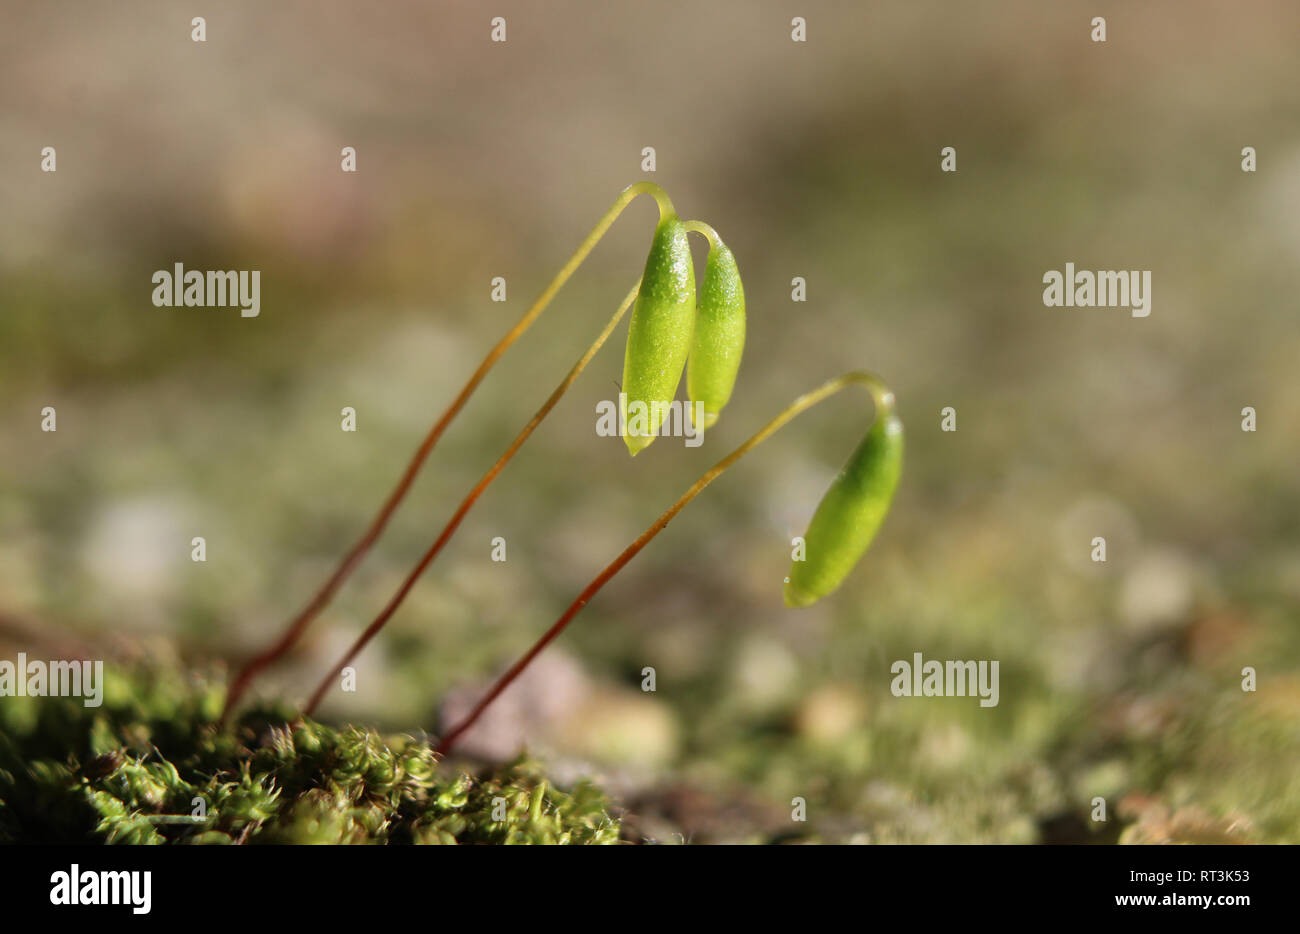 Extreme close up image of tiny moss sporophytes (fruiting bodies) of the moss plant. Stock Photo